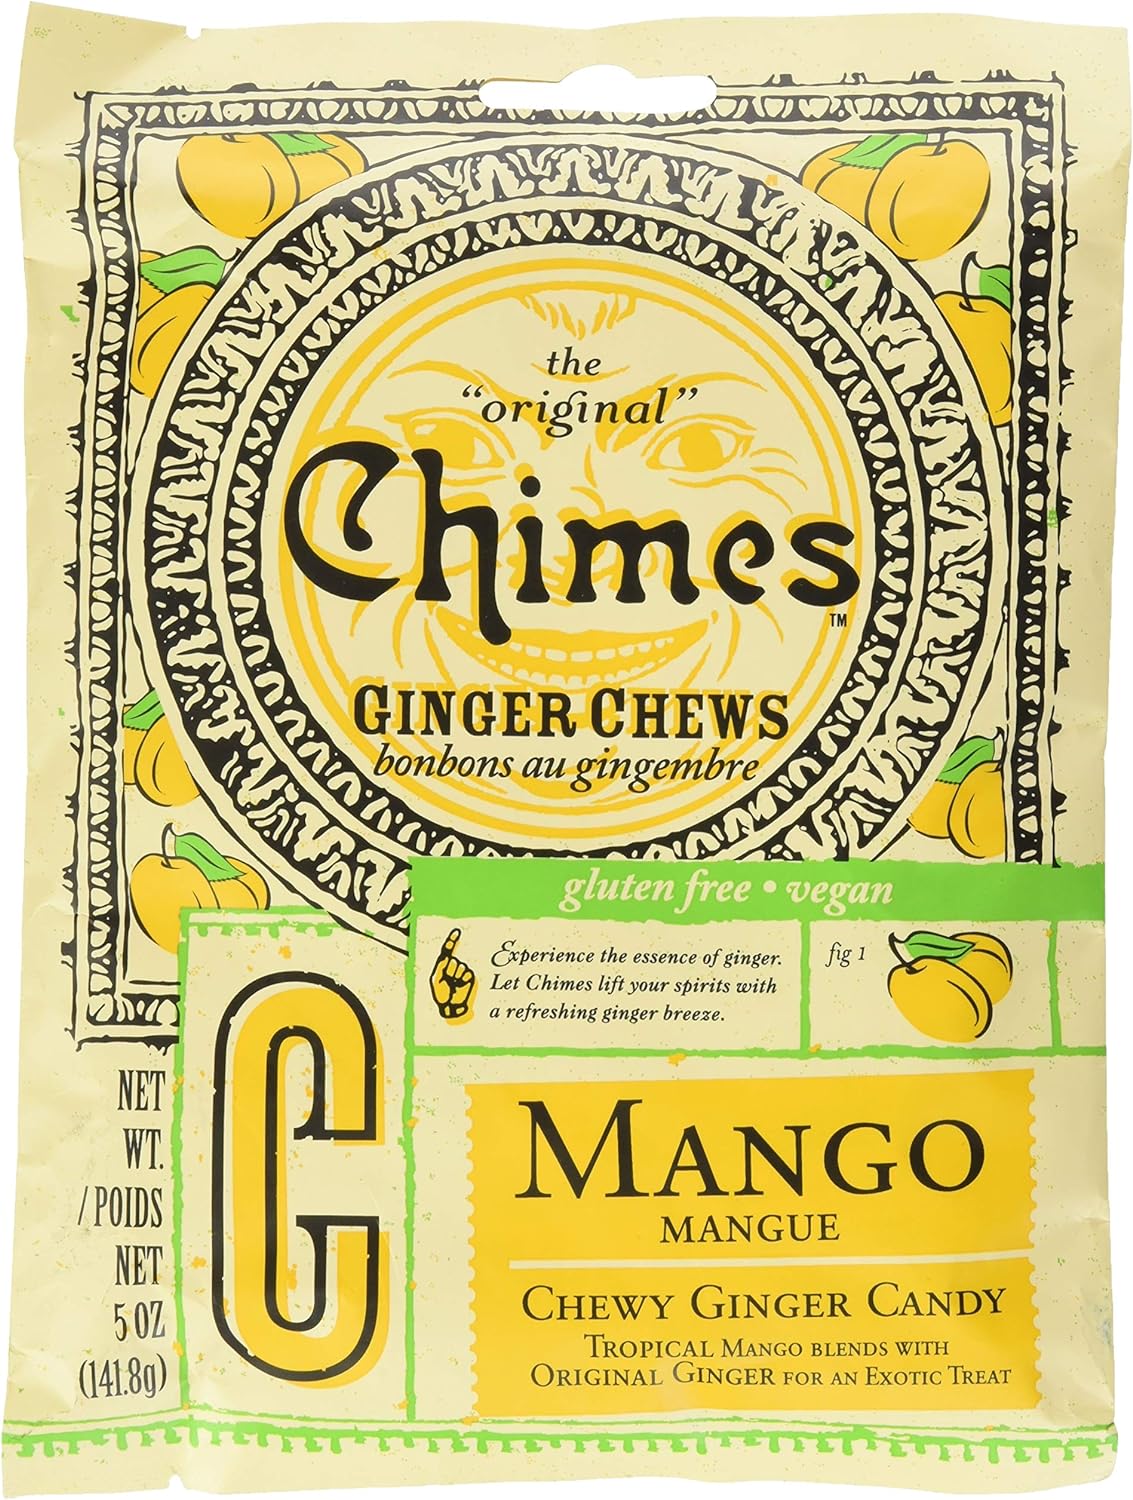 Chimes Chewy Ginger Candy - Mango (141.8g)